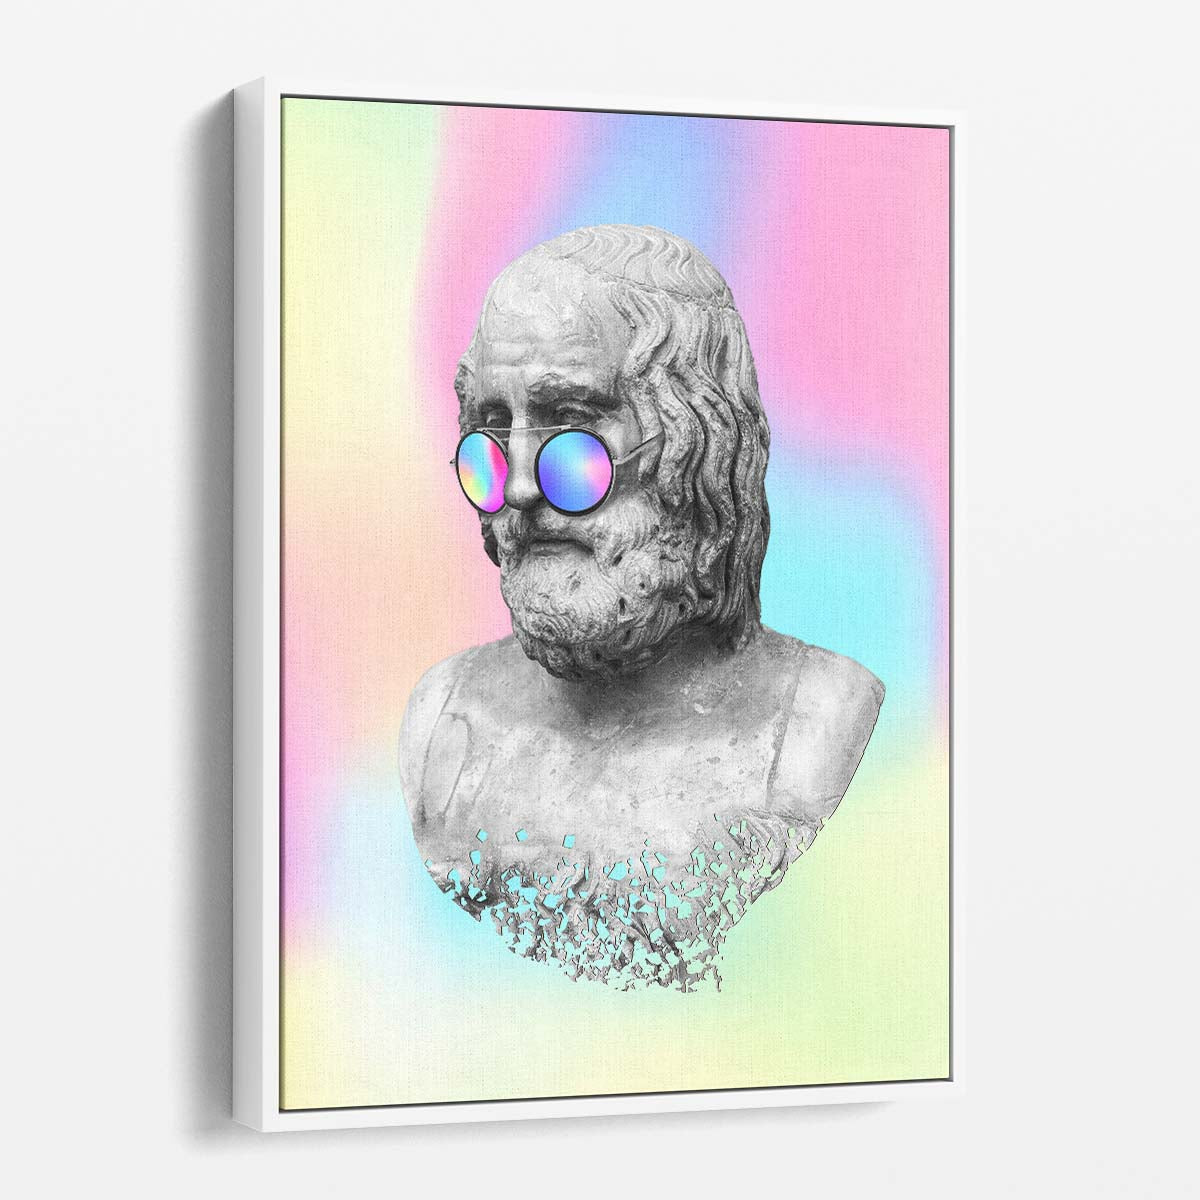 Fadil Roze's Holo-3D Greek Statue Illustration Vintage Neo-Renaissance Art by Luxuriance Designs, made in USA